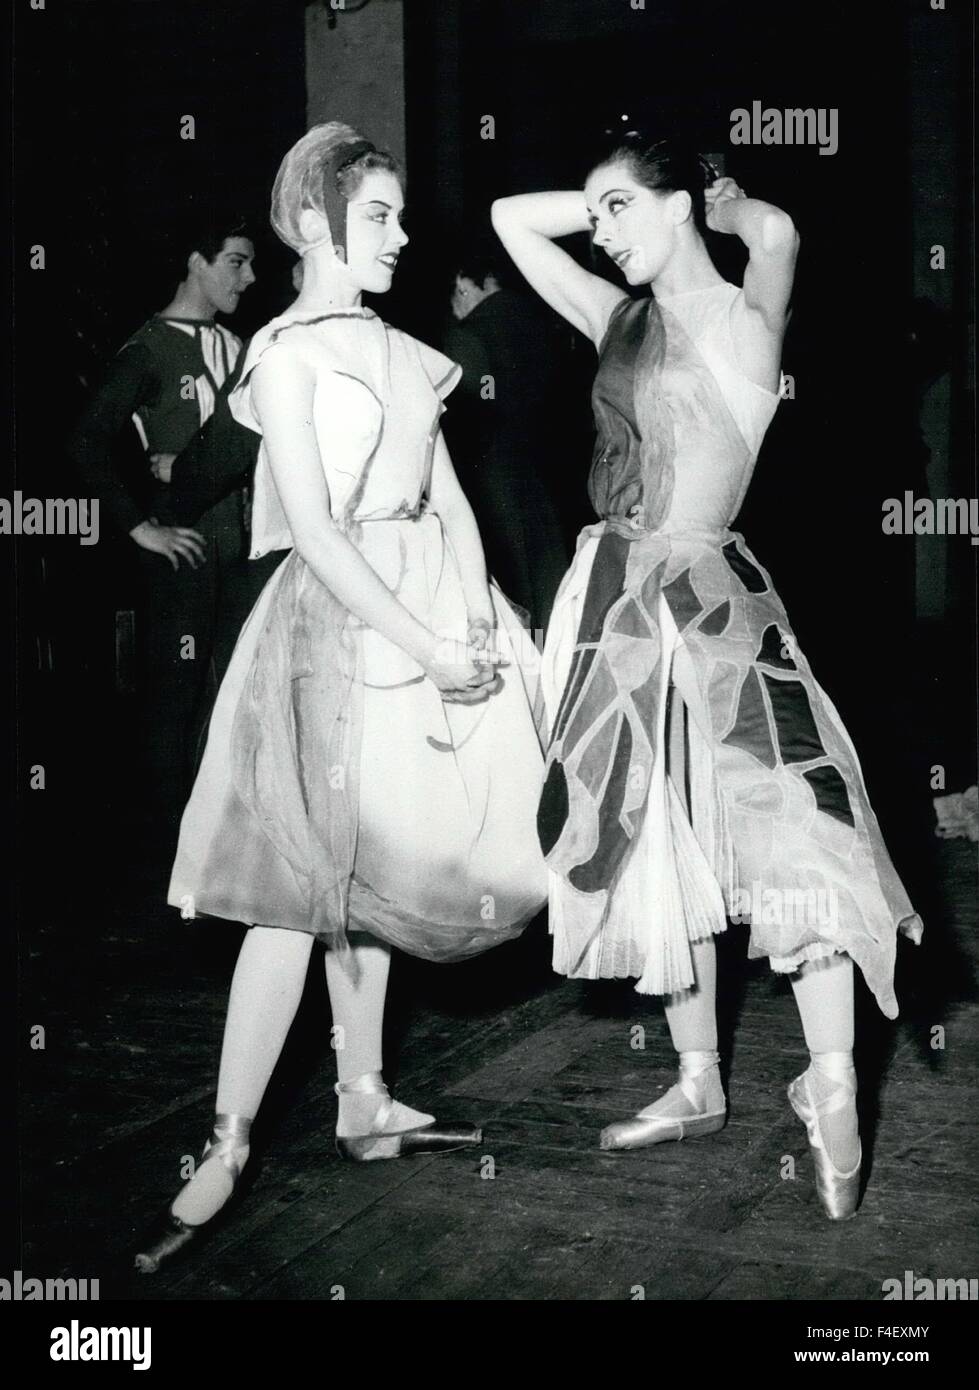 1969 - Susan Alexander talks with star Anne Heaton between rehearsals for the Blue Rose ballet. © Keystone Pictures USA/ZUMAPRESS.com/Alamy Live News Stock Photo